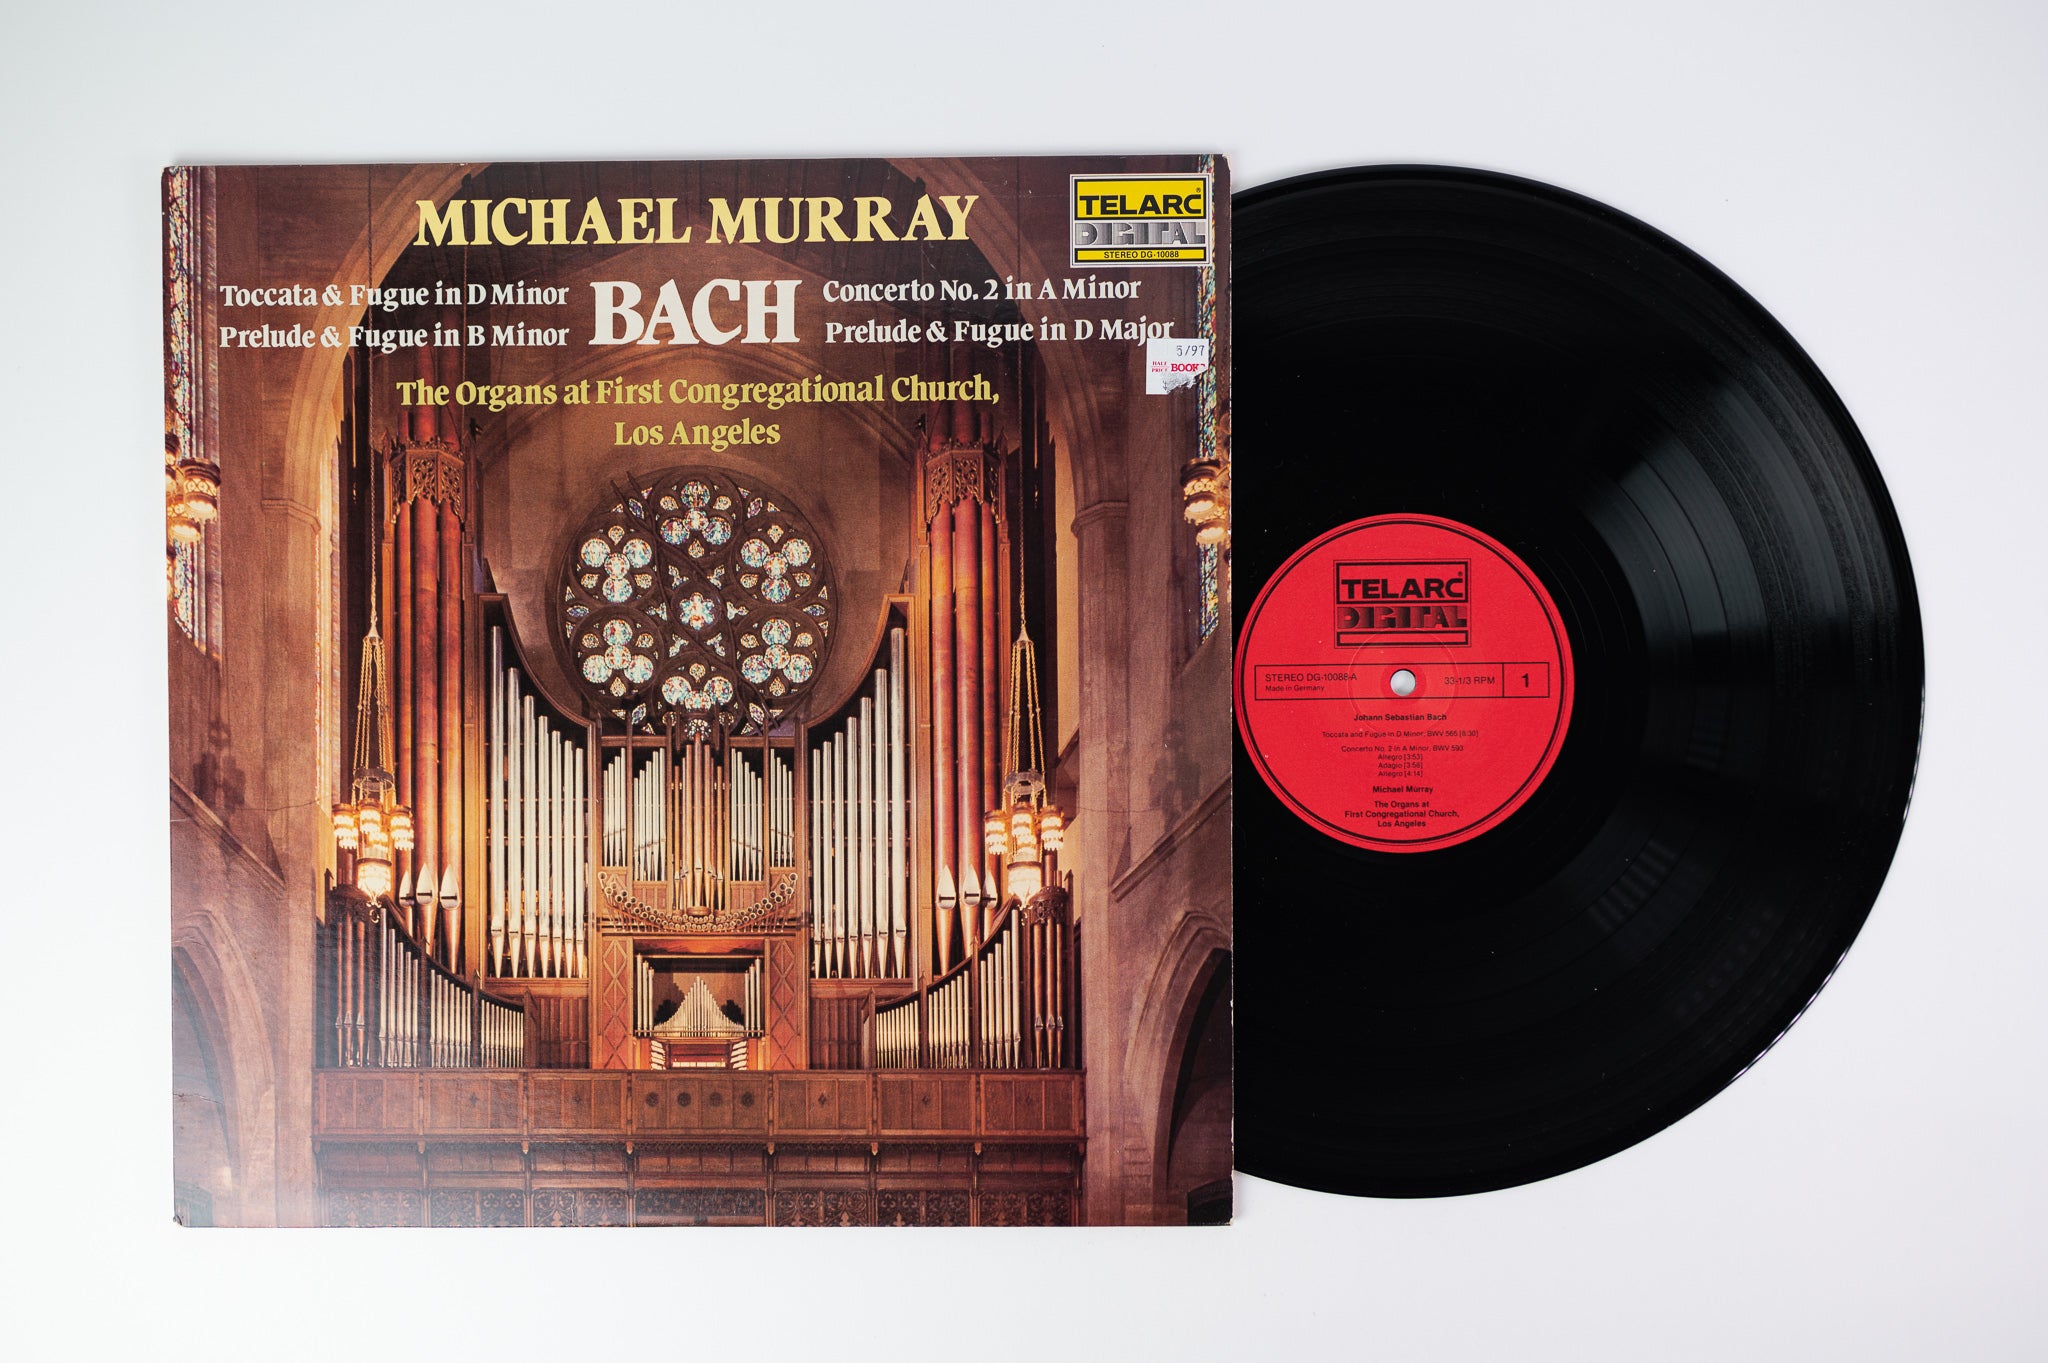 Michael Murray, Bach - The Organs At First Congregational Church, Los Angeles on Telarc